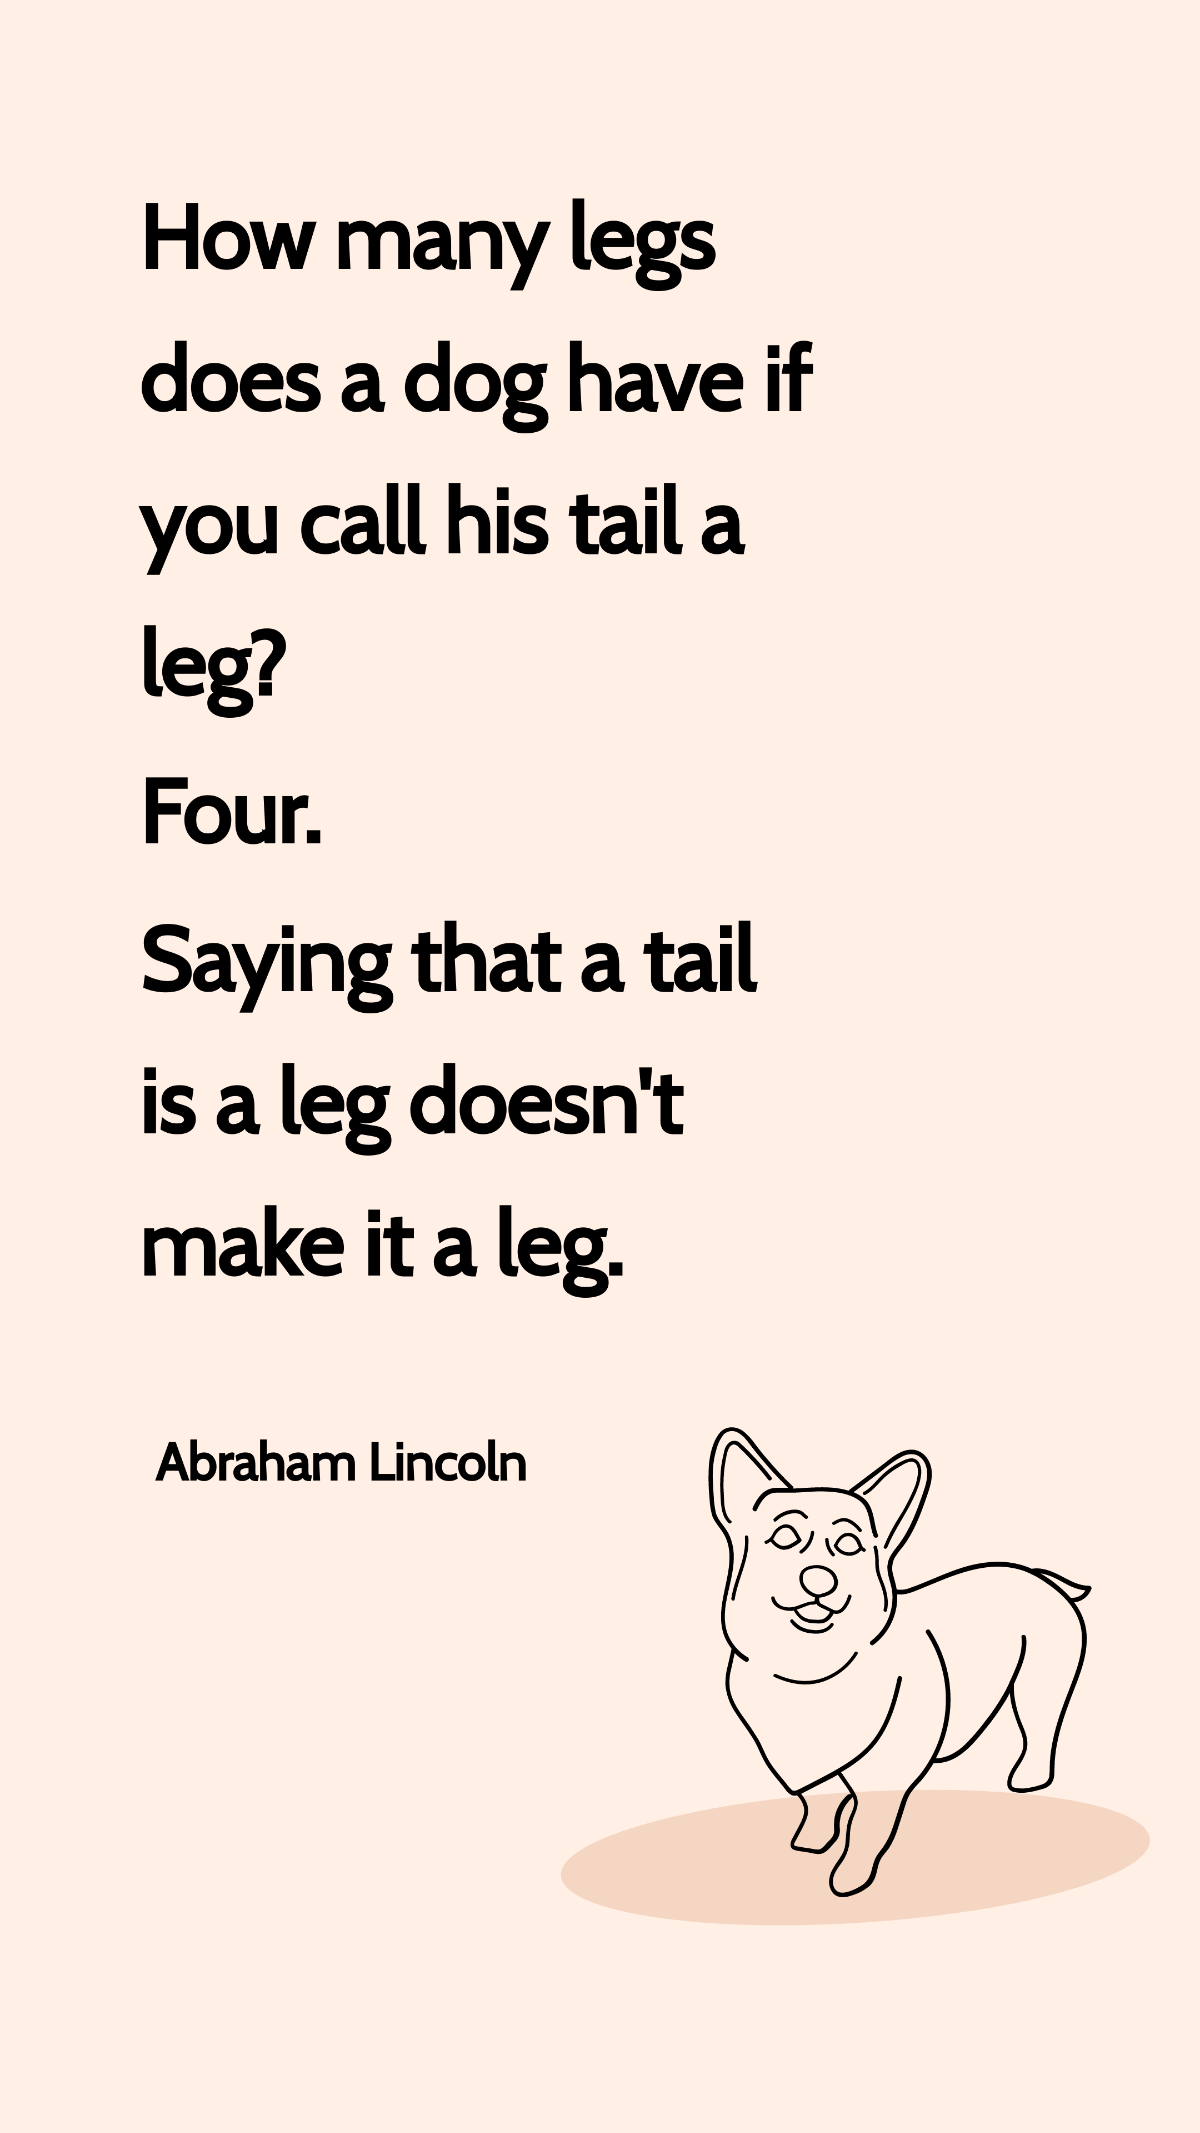 Free Abraham Lincoln - How many legs does a dog have if you call his tail a leg? Four. Saying that a tail is a leg doesn't make it a leg. Template